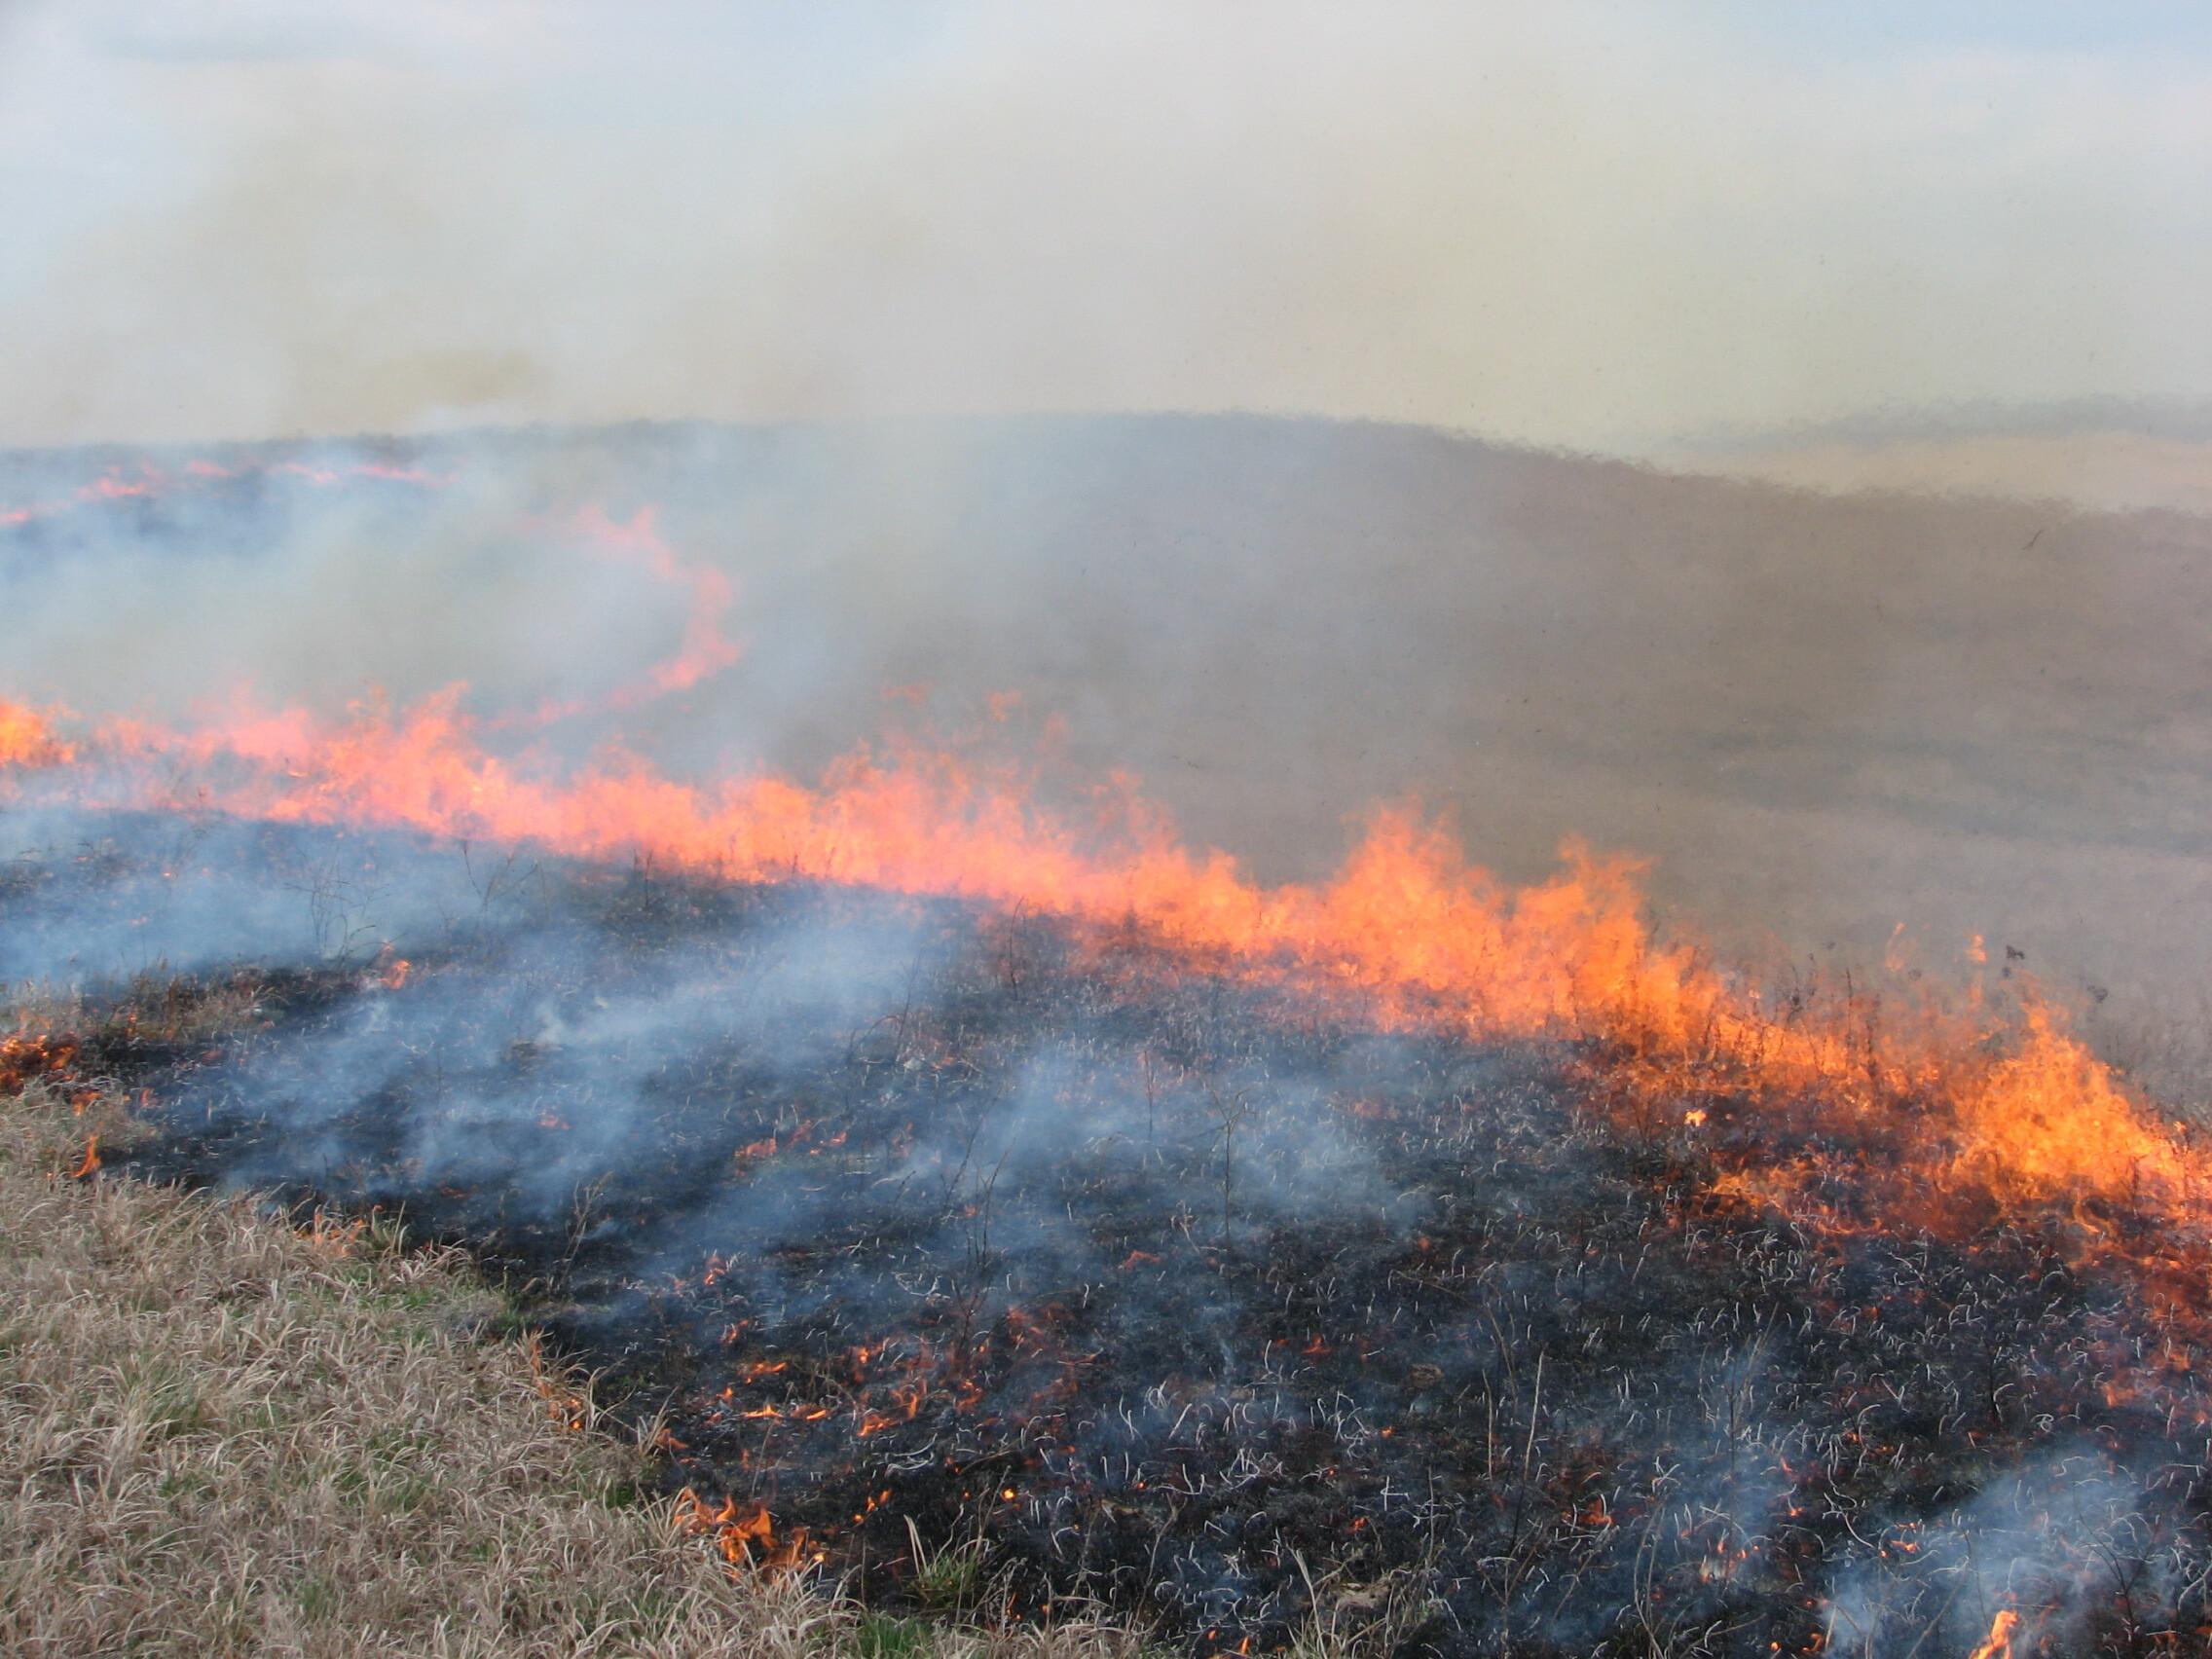 Flames spread on either side of a smoldering black line in short grass. Larger flames burn on the far side.